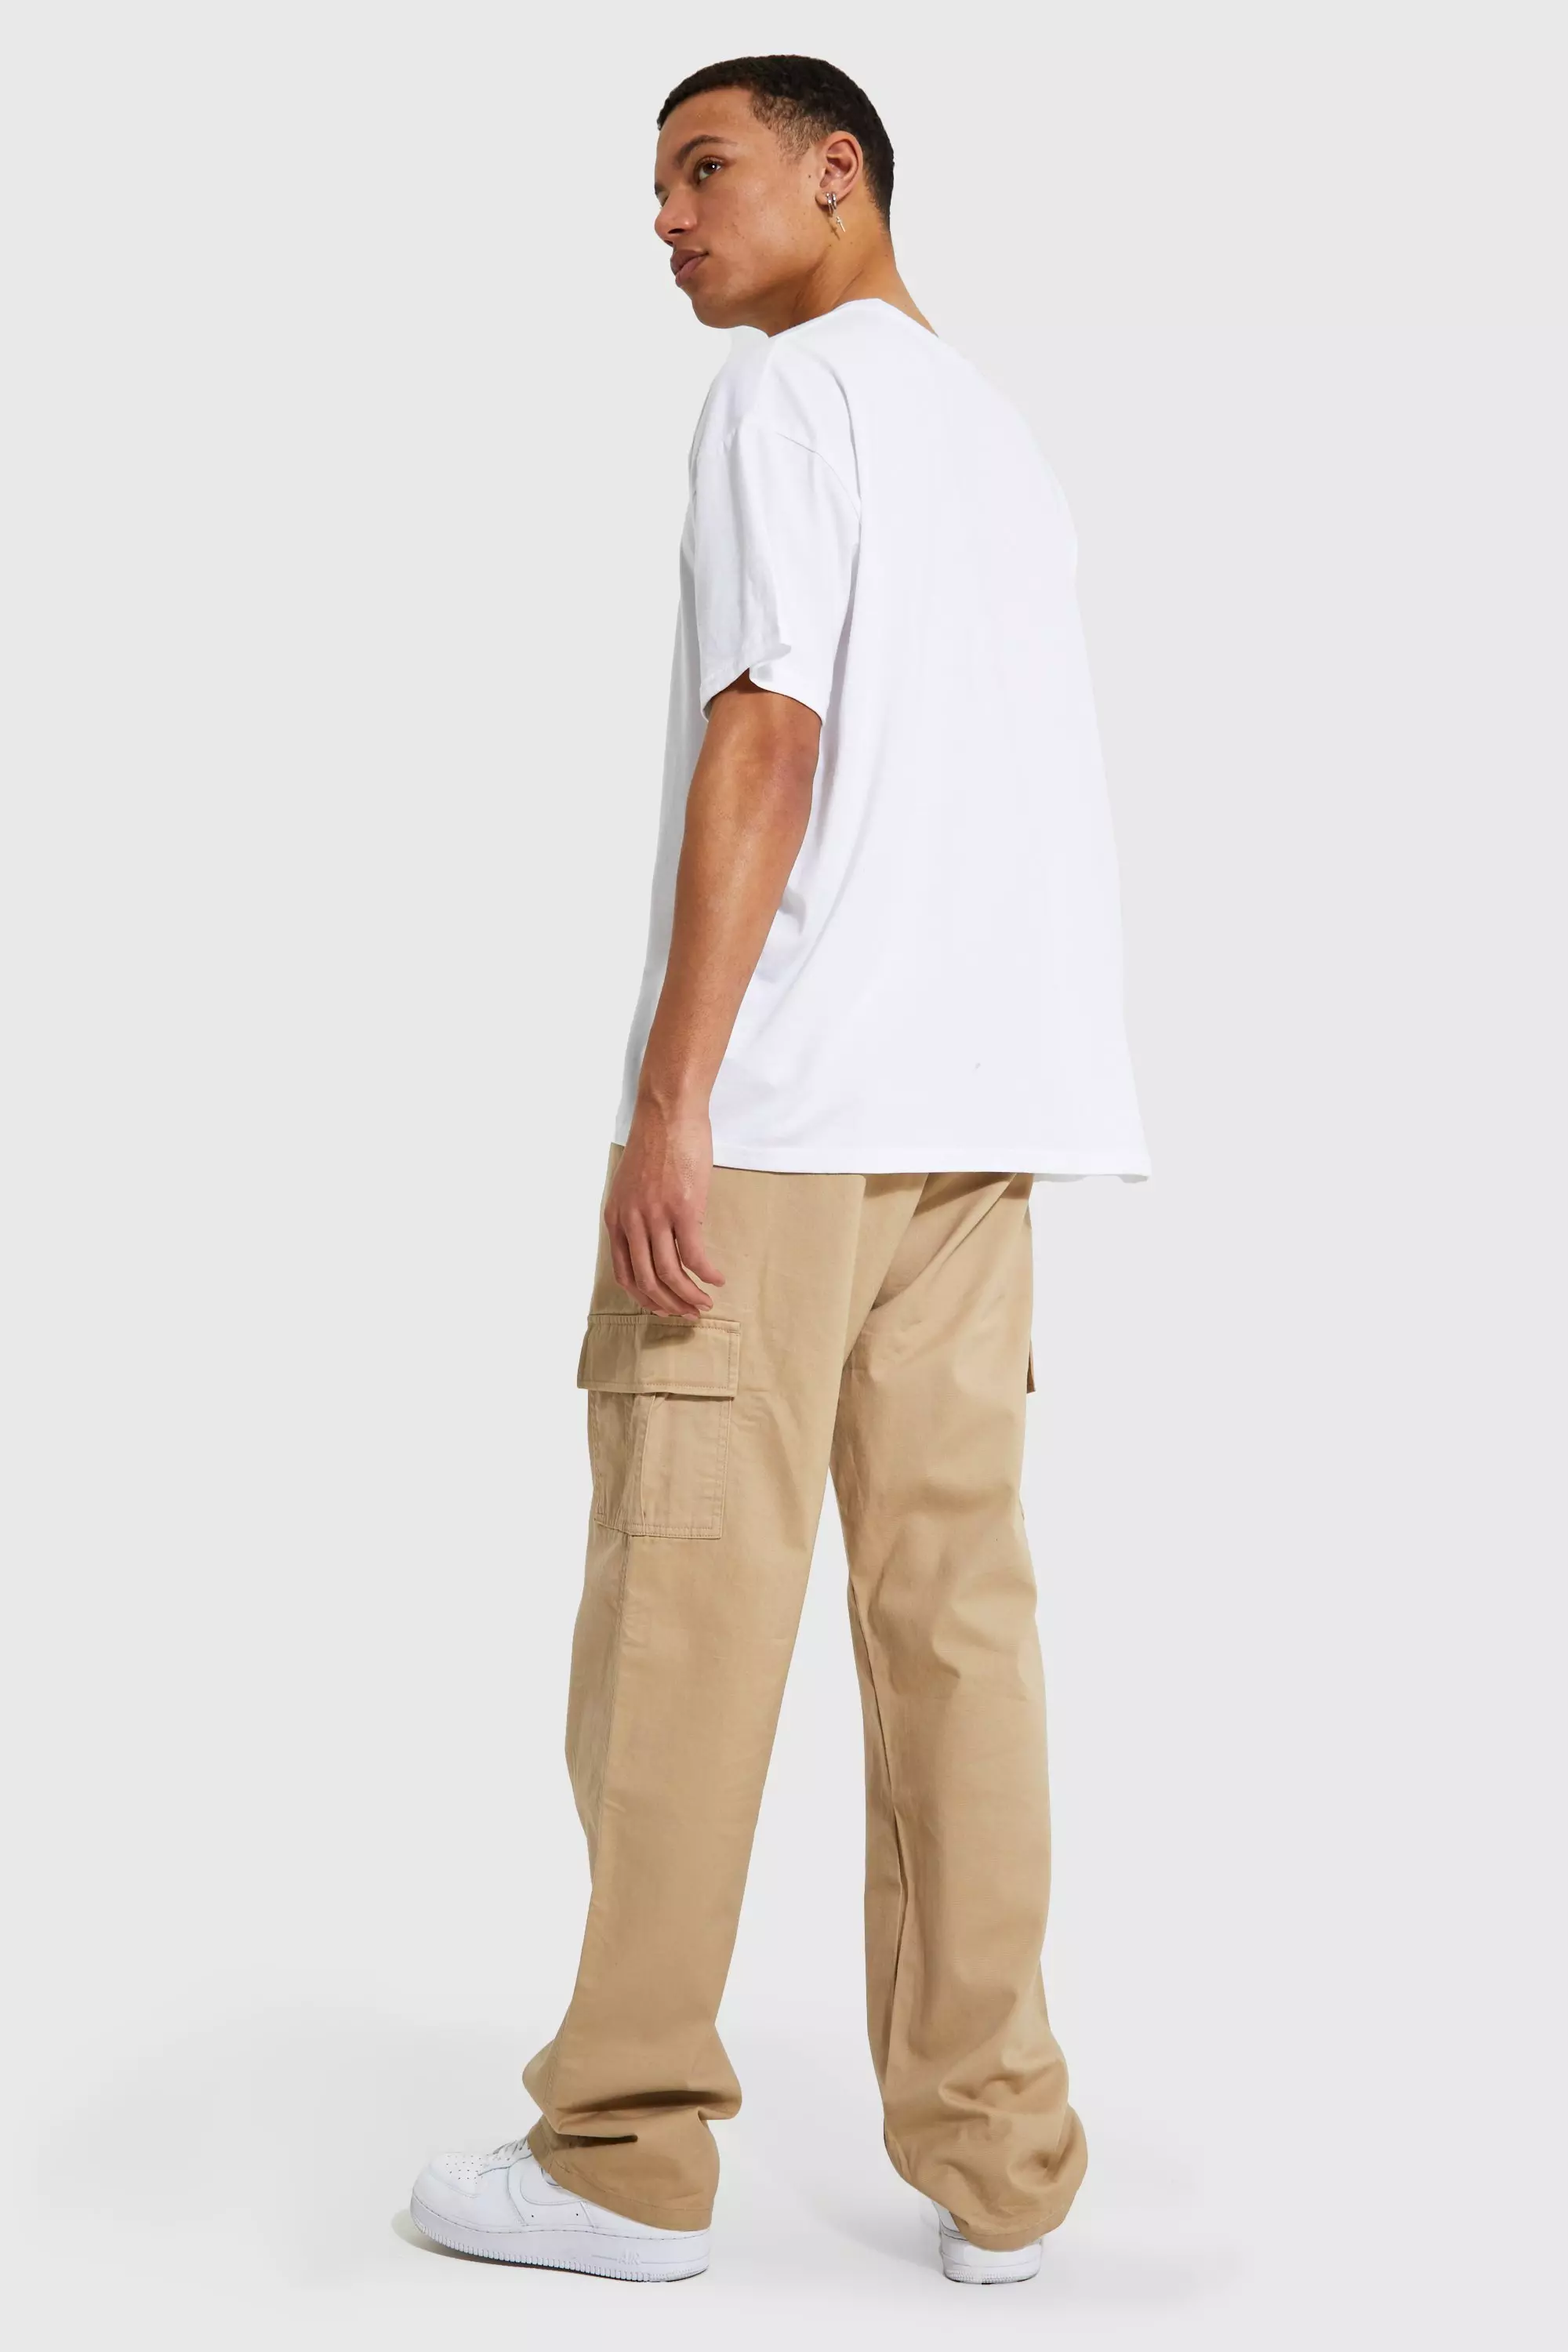 Cargo pants my size? : r/tall